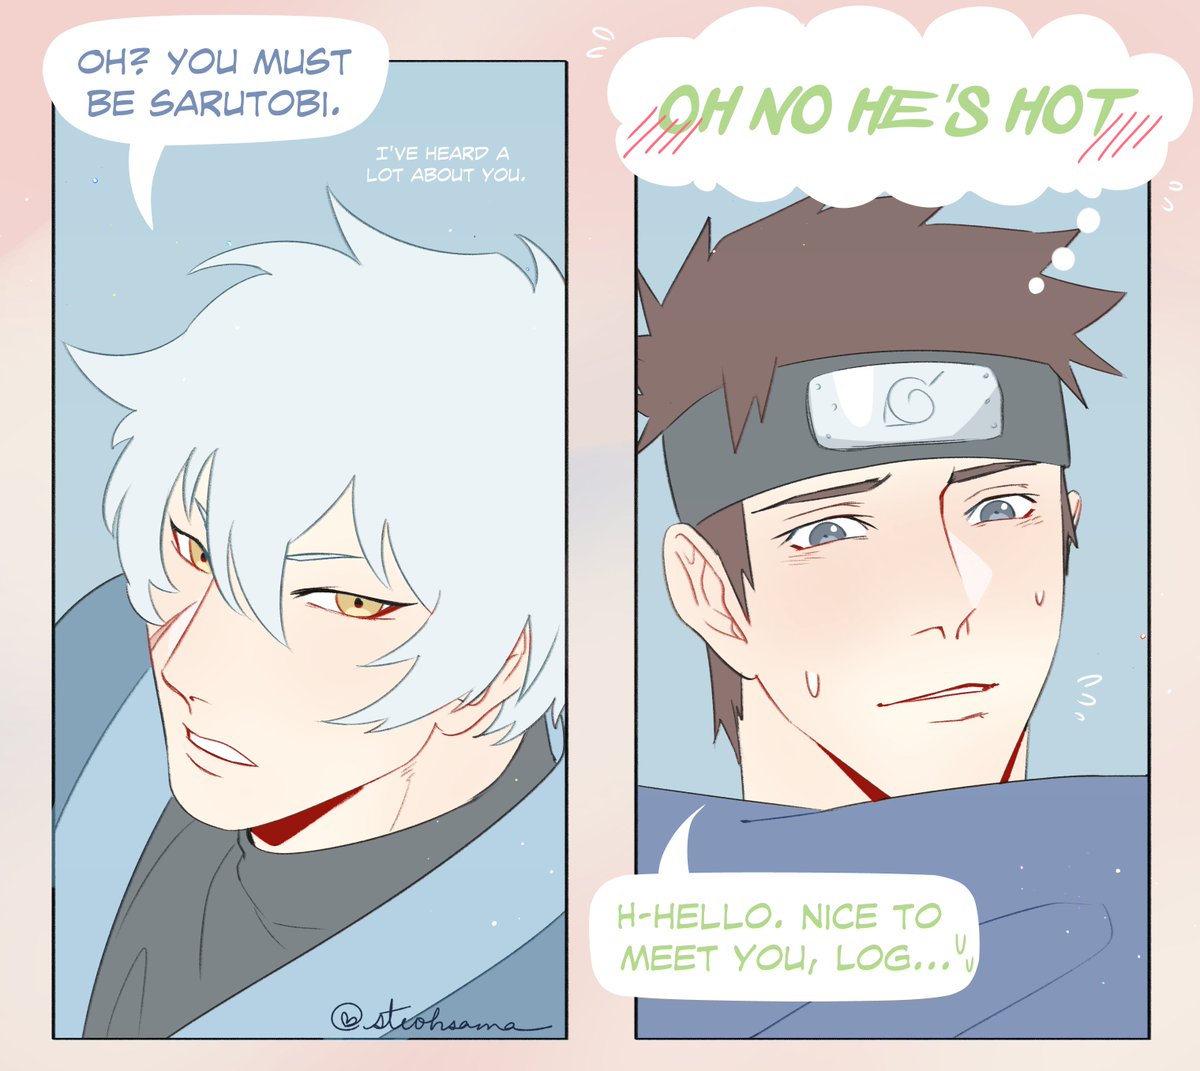 parent teacher conferences but they sent the hot brother instead 😳

just some konolog shenanigans. their potential is very interesting! 